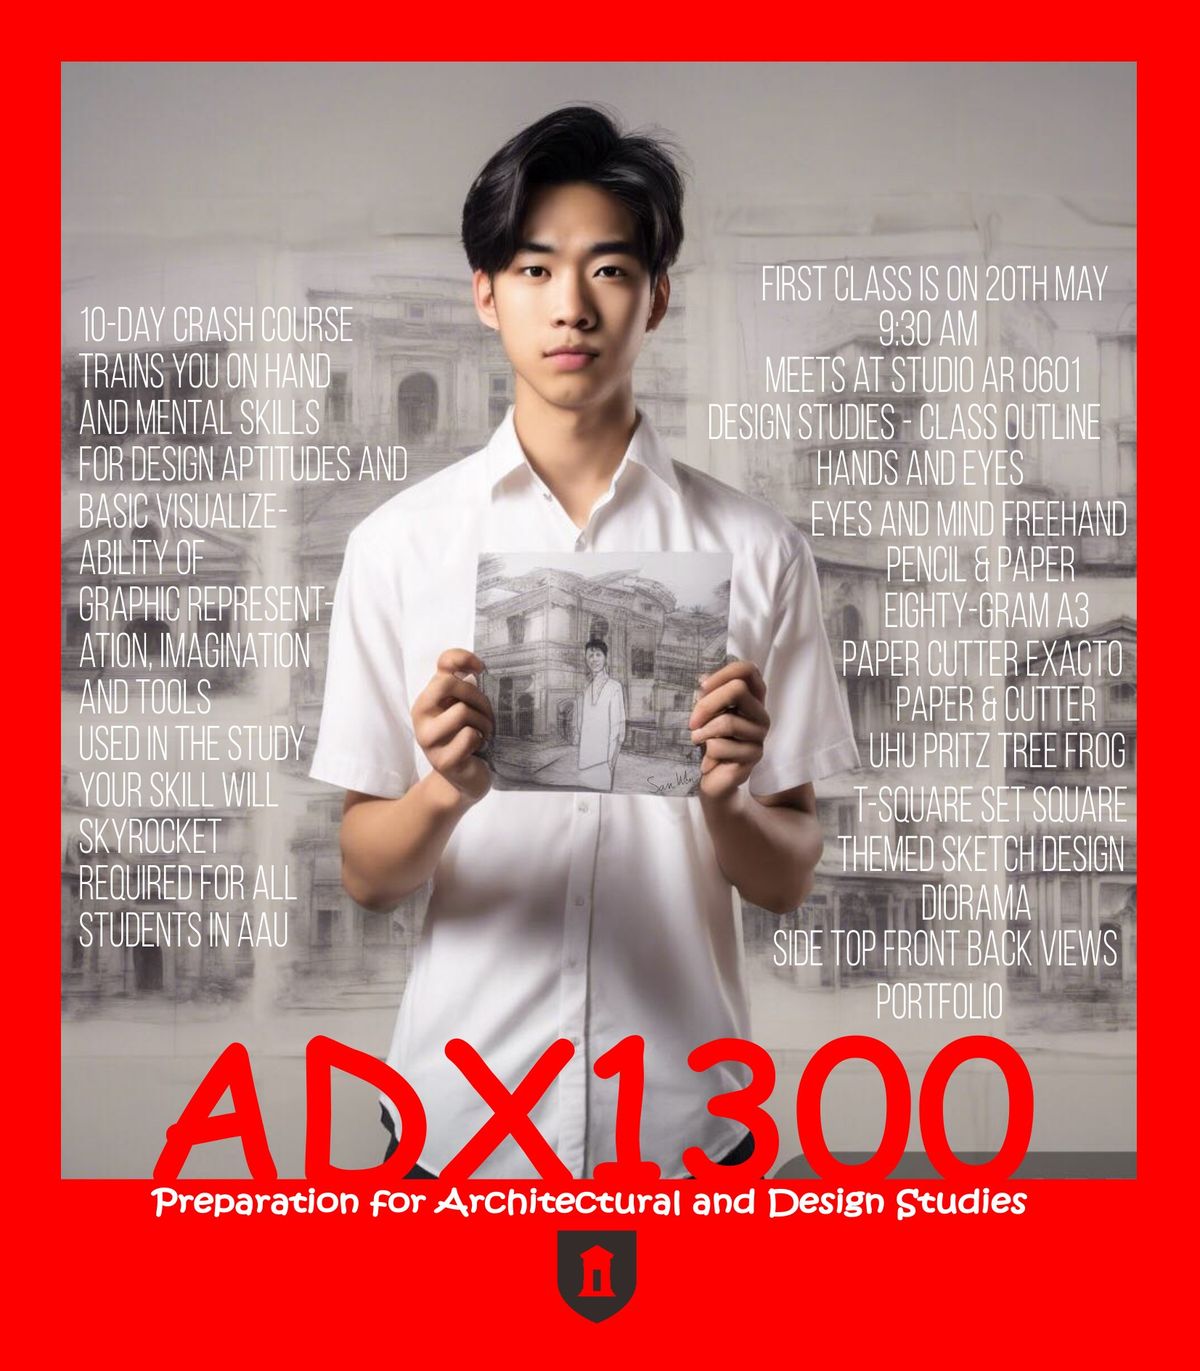 ADX 1300 Preparation for Architectural and Design Studies